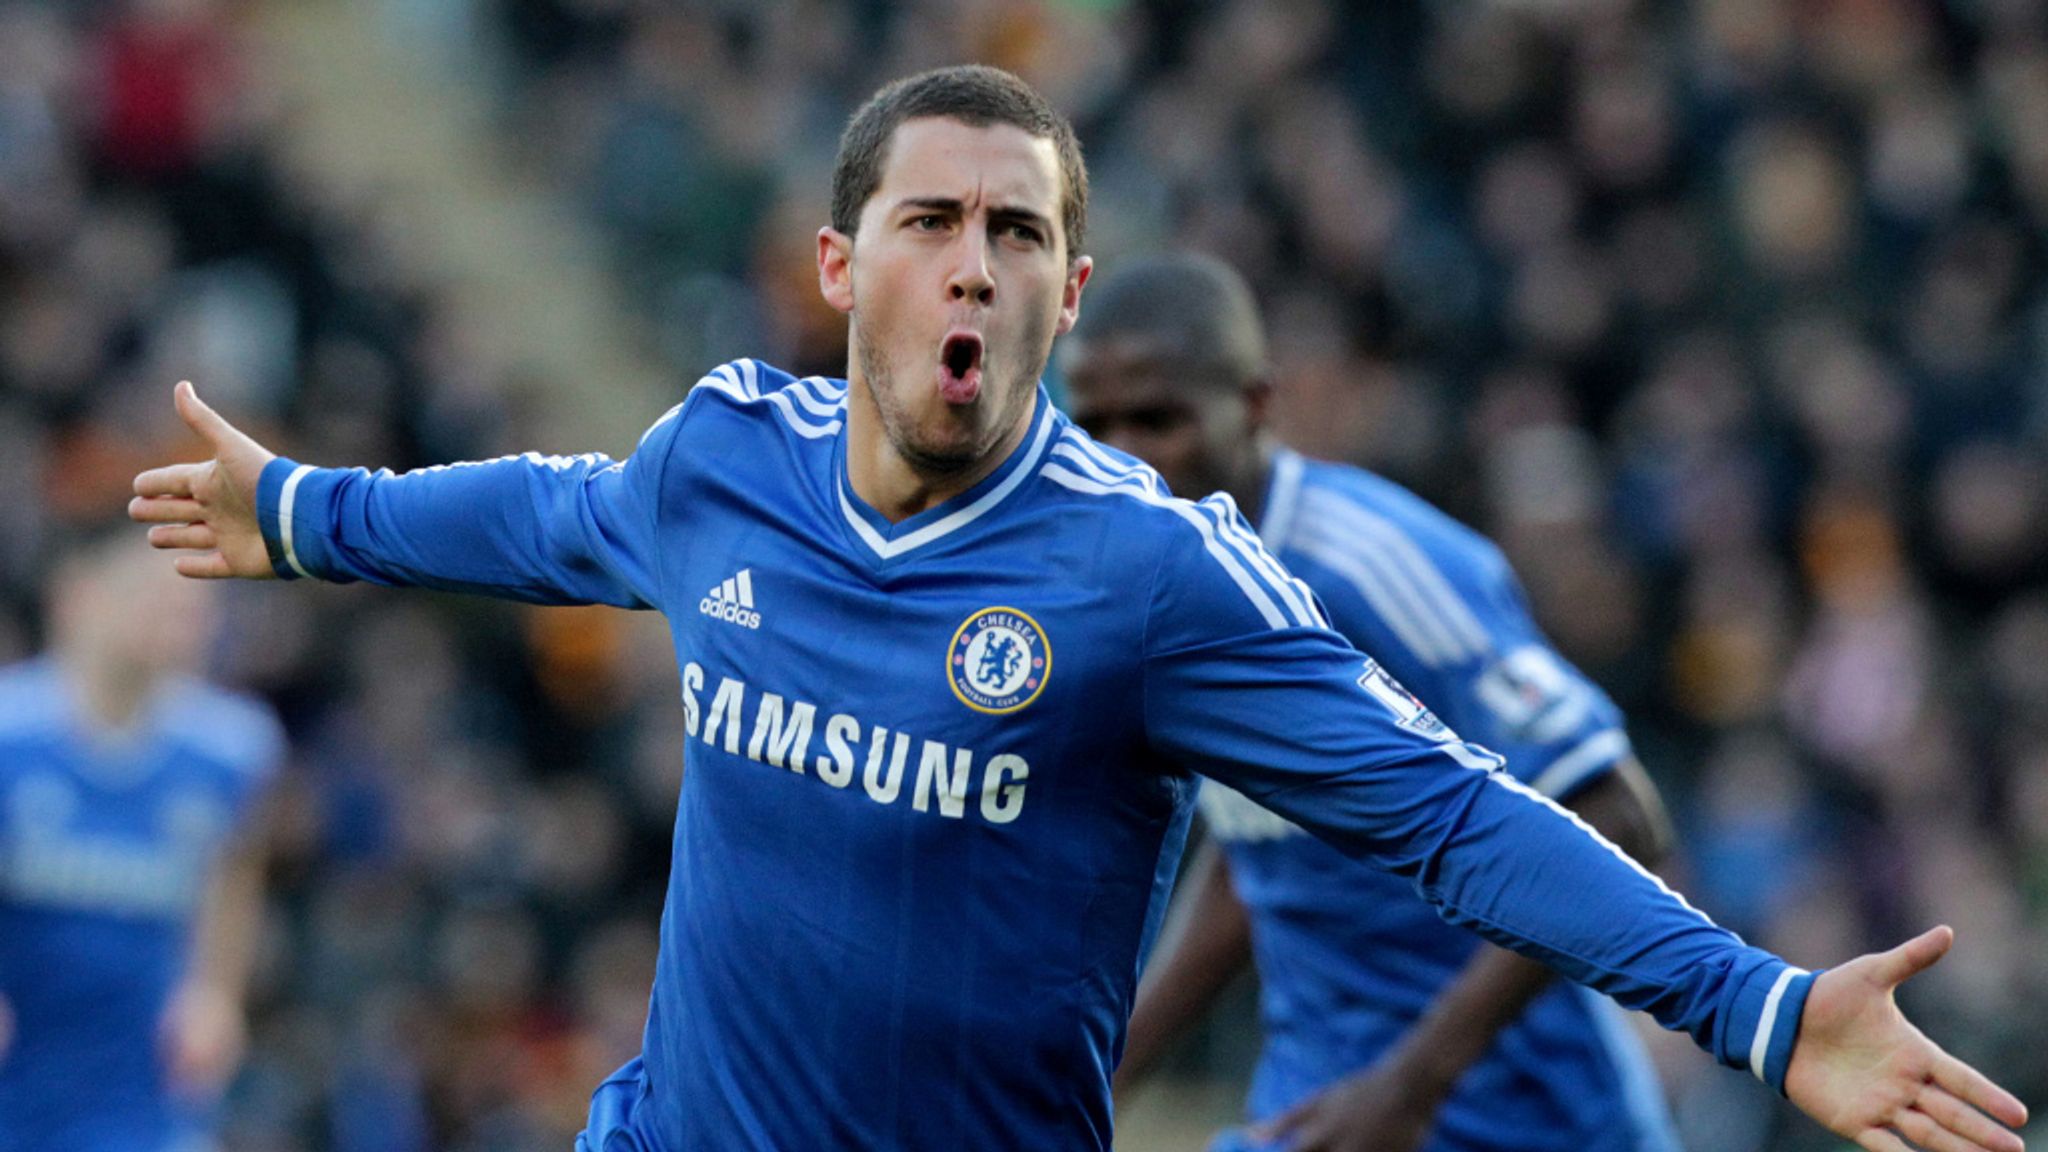 Chelsea's Eden Hazard wants to match Cristiano Ronaldo and Lionel Messi, Football News